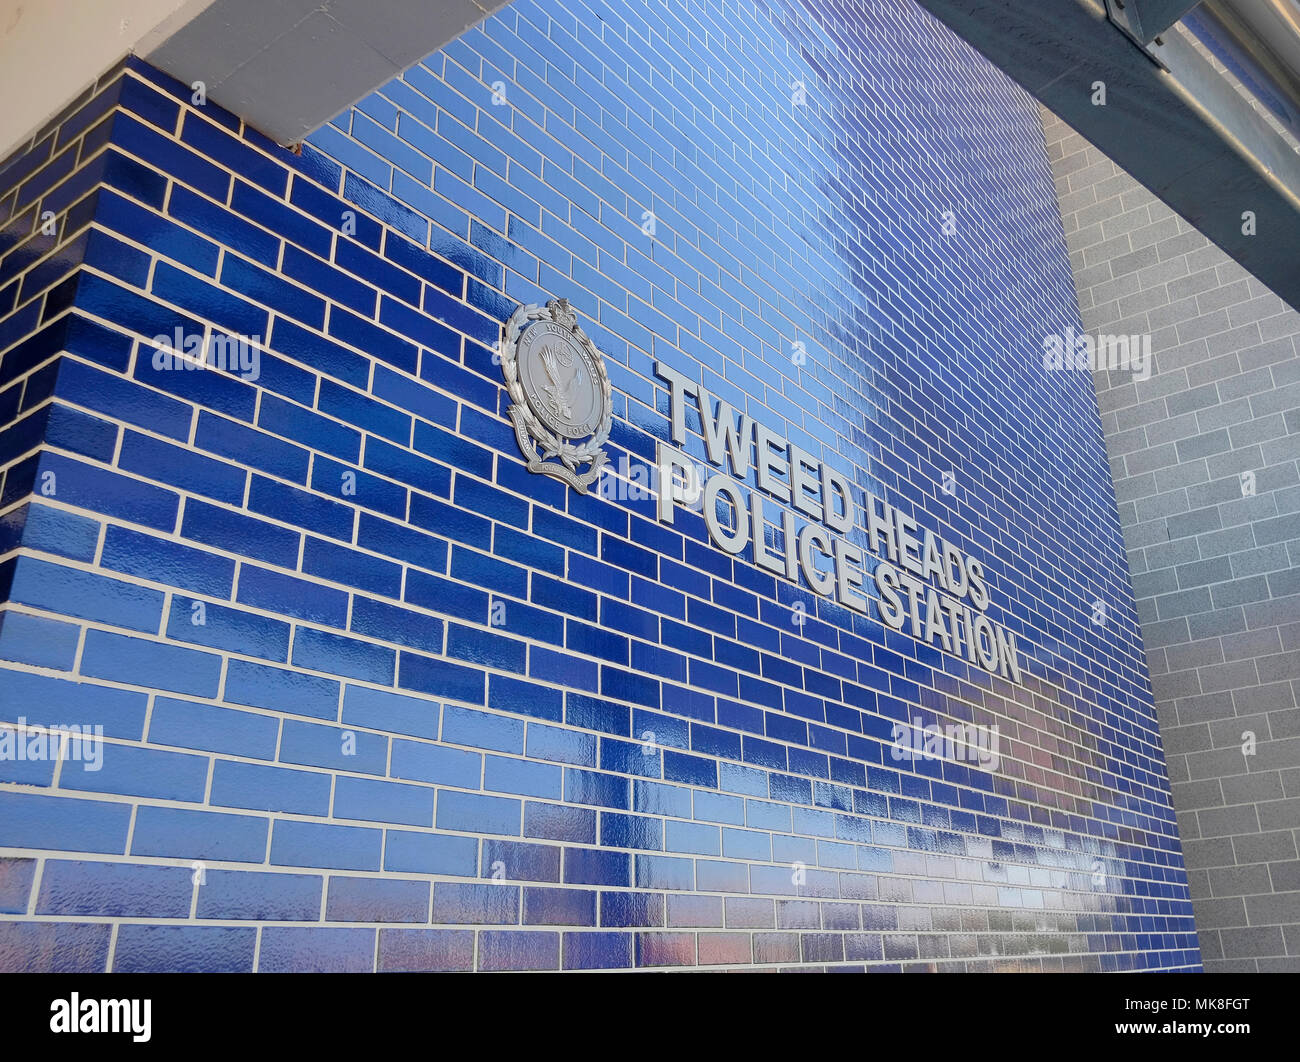 front of new Tweed Heads Police Station including sign on tiled wall Stock Photo